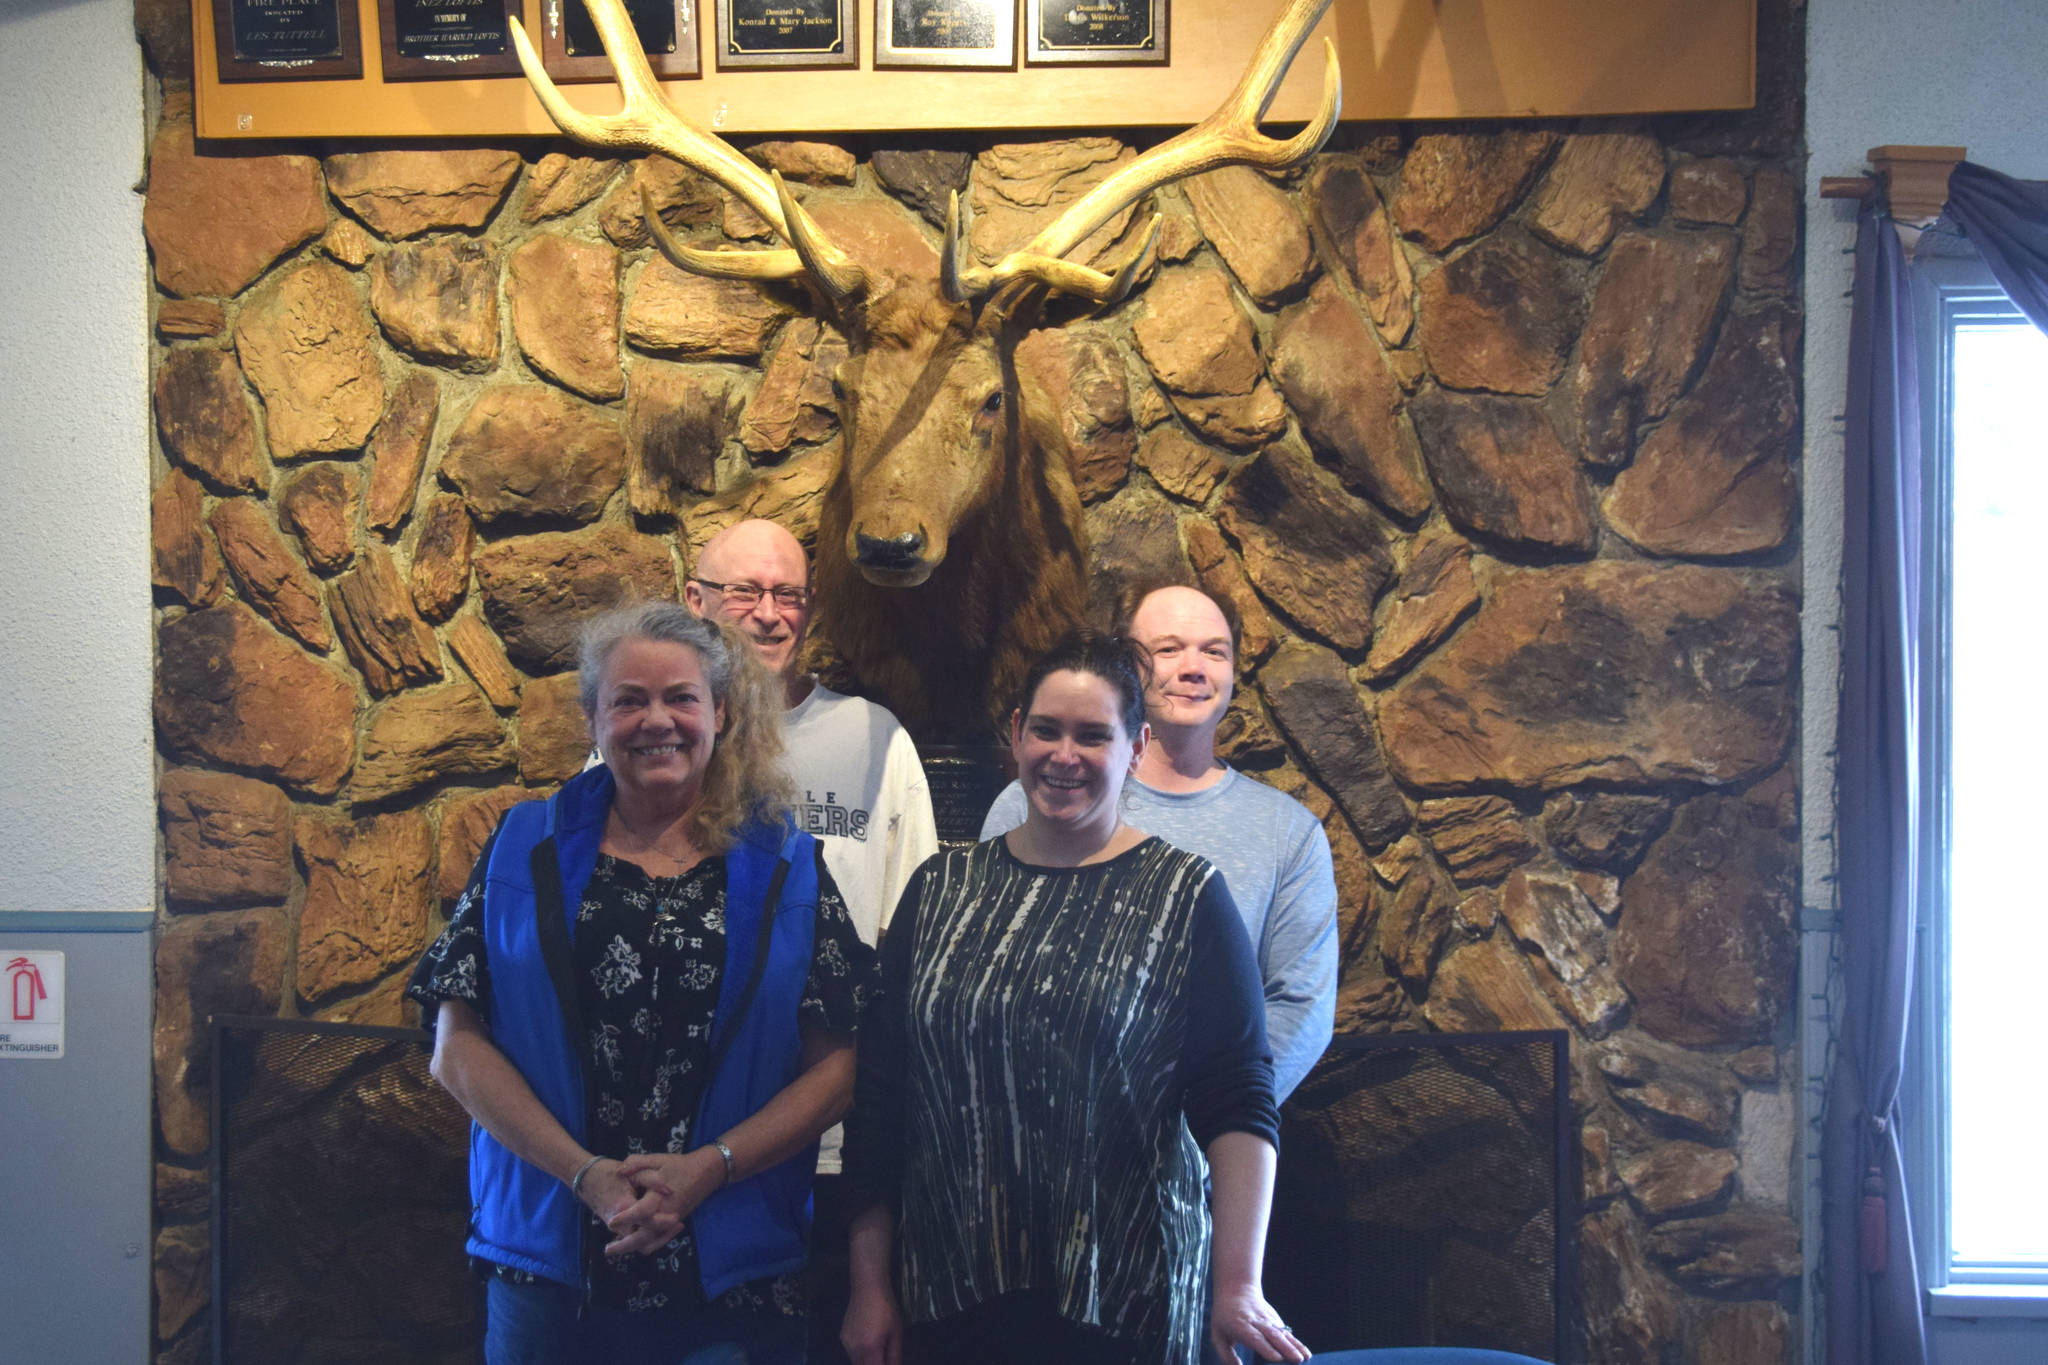 Kenai Elks Lodge members (from left to right) Mary Jackson, Ken Cole, Trina Sanford and Ryan Huss-Green stand in front of the lodge’s signature mounted elk on Tuesday. (Photo by Brian Mazurek/Peninsula Clarion)